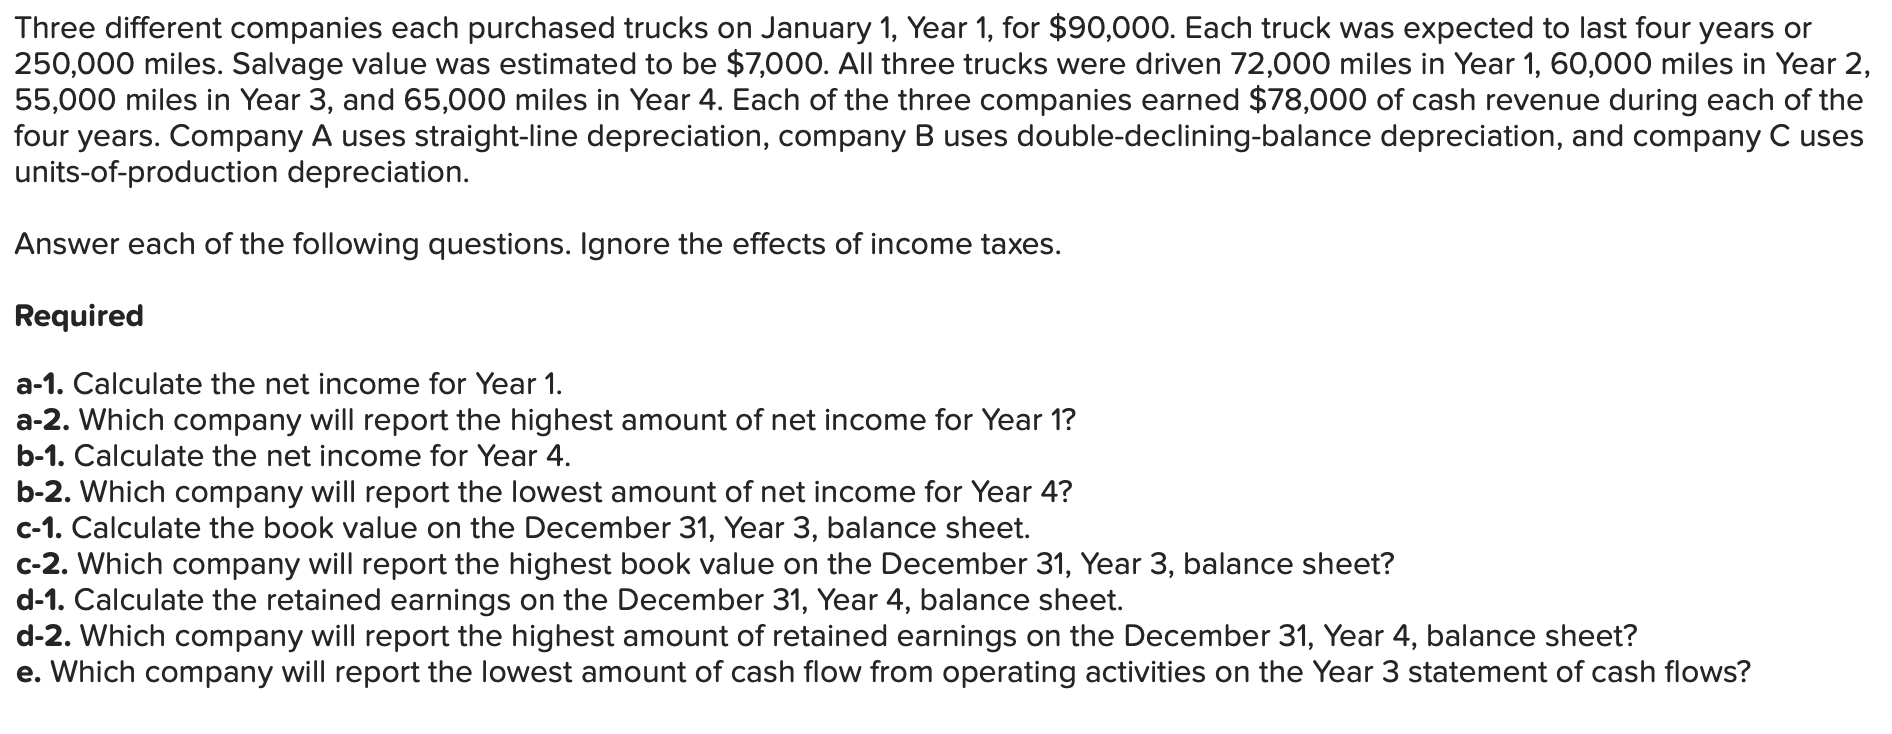 Three different companies each purchased trucks on January 1, Year 1, for $90,000. Each truck was expected to last four years